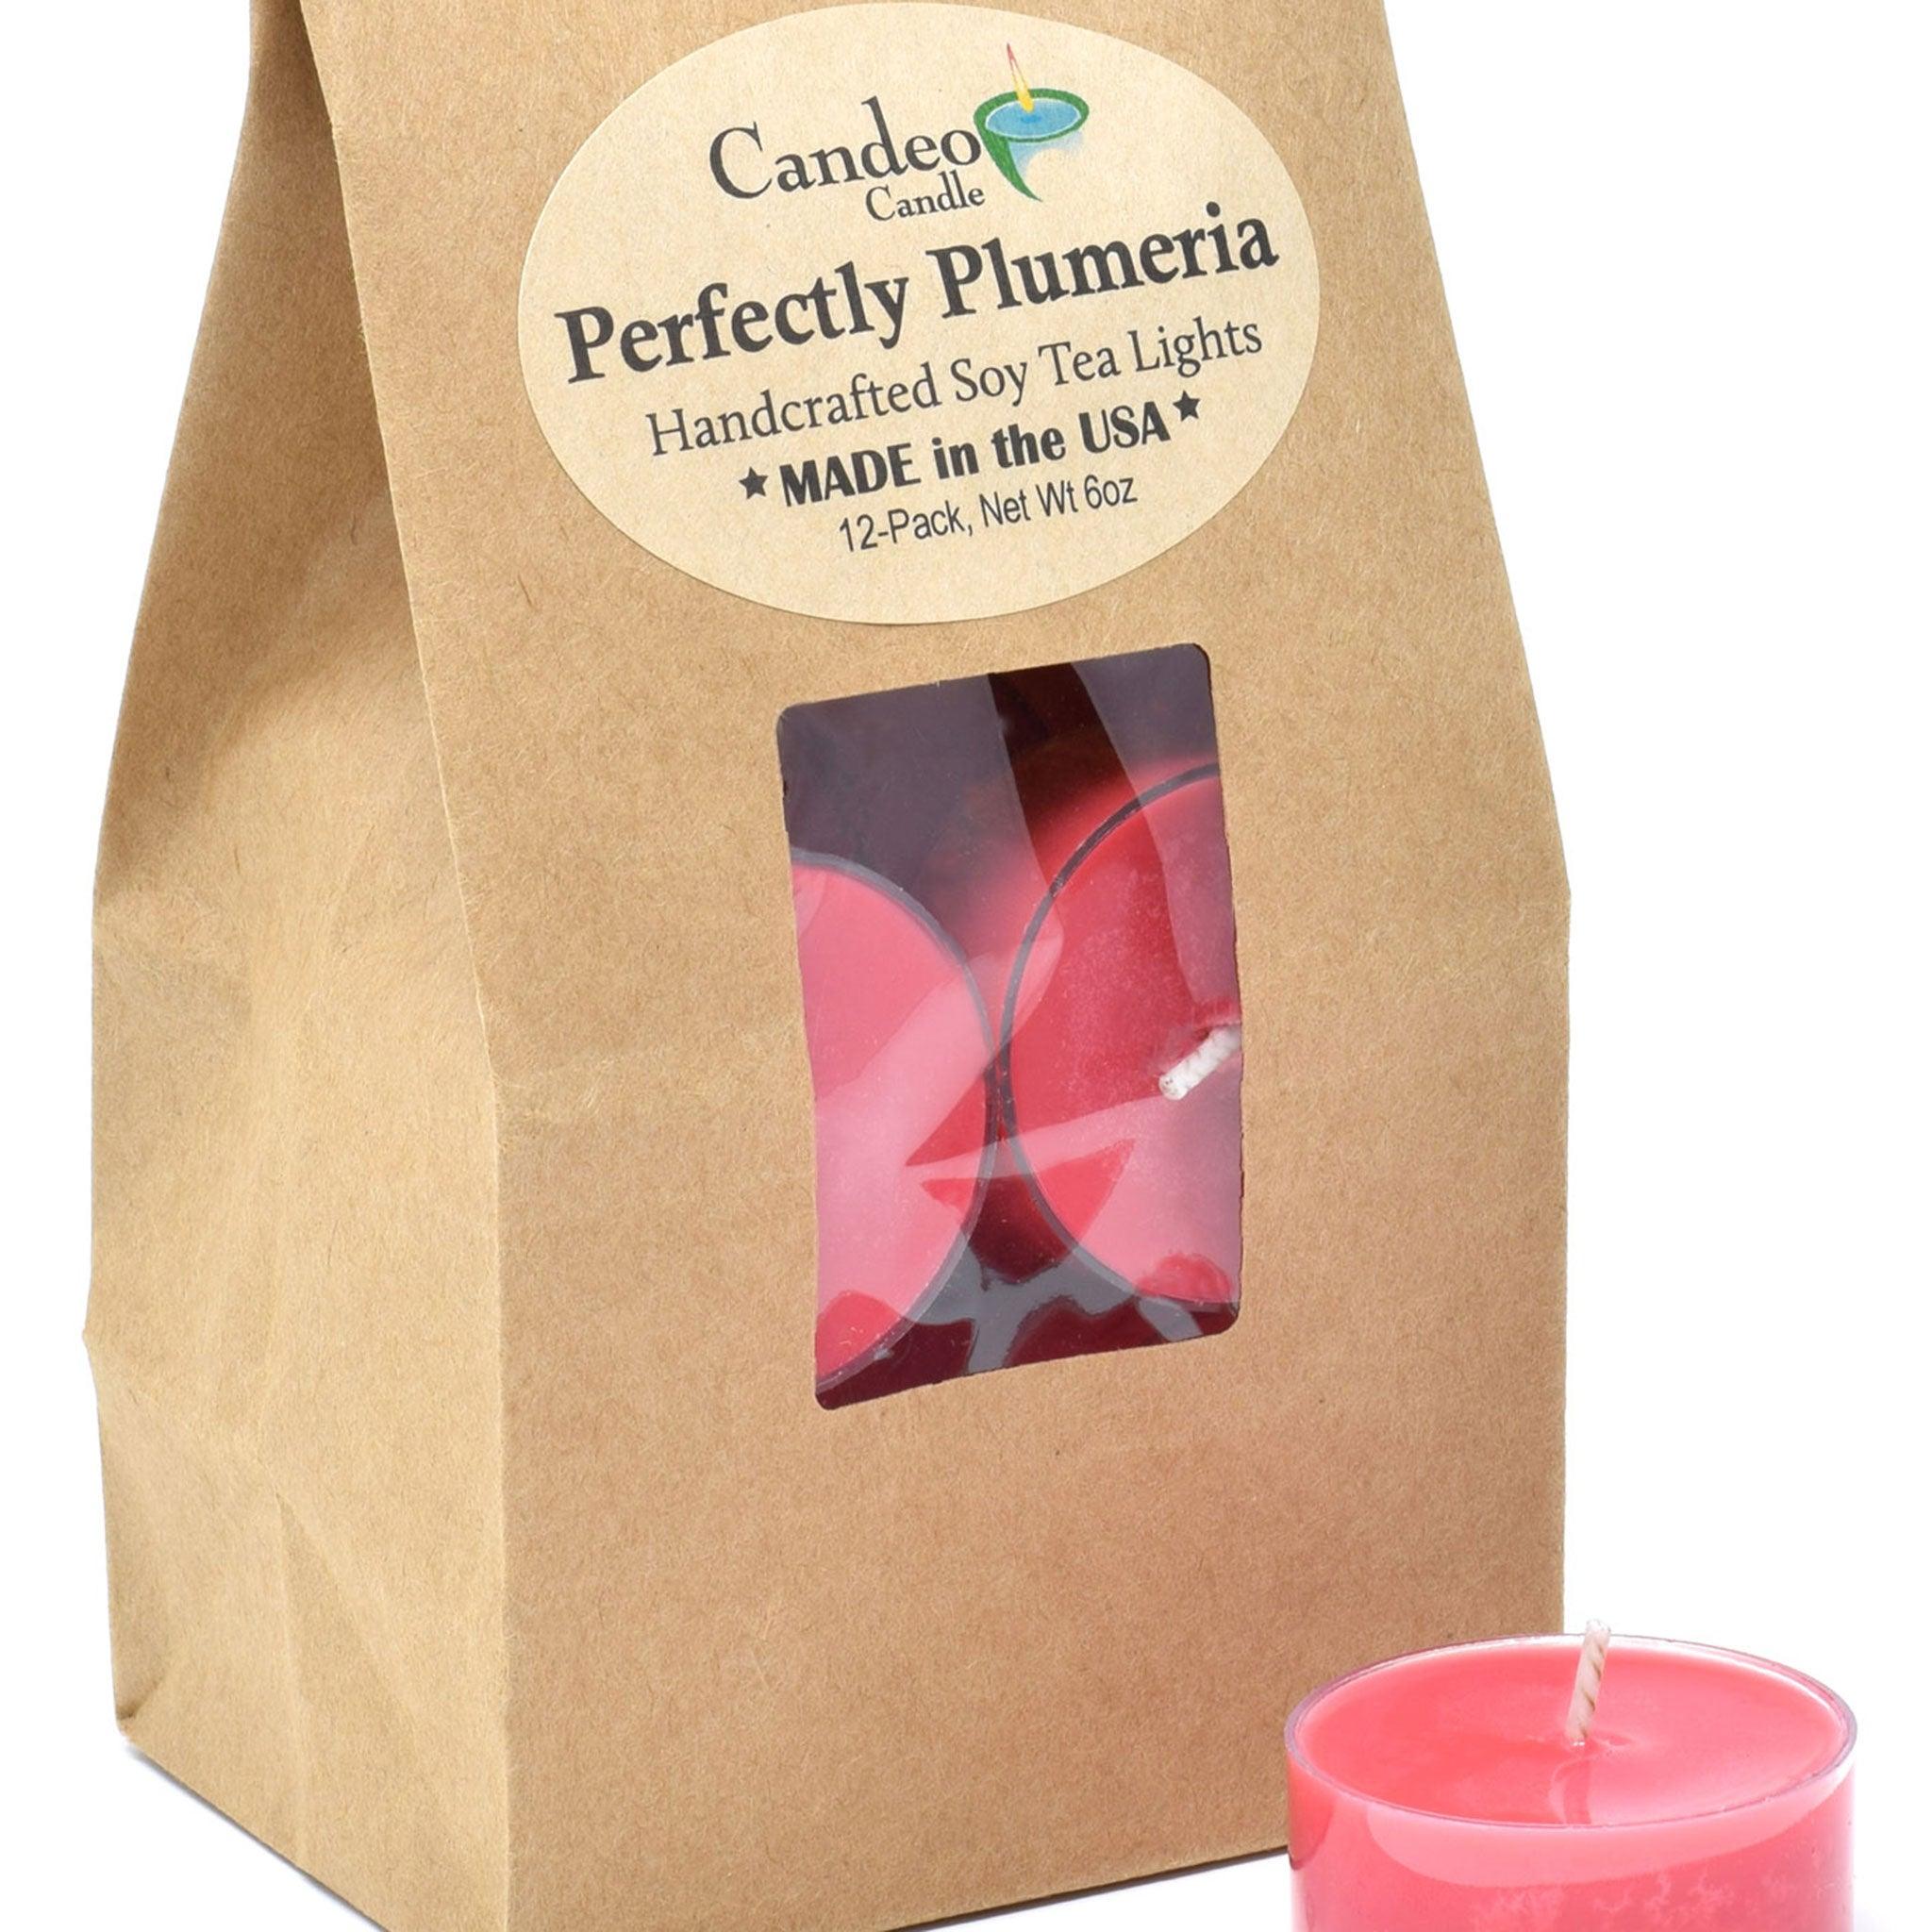 Perfectly Plumeria, Soy Tea Light 12-Pack - Candeo Candle